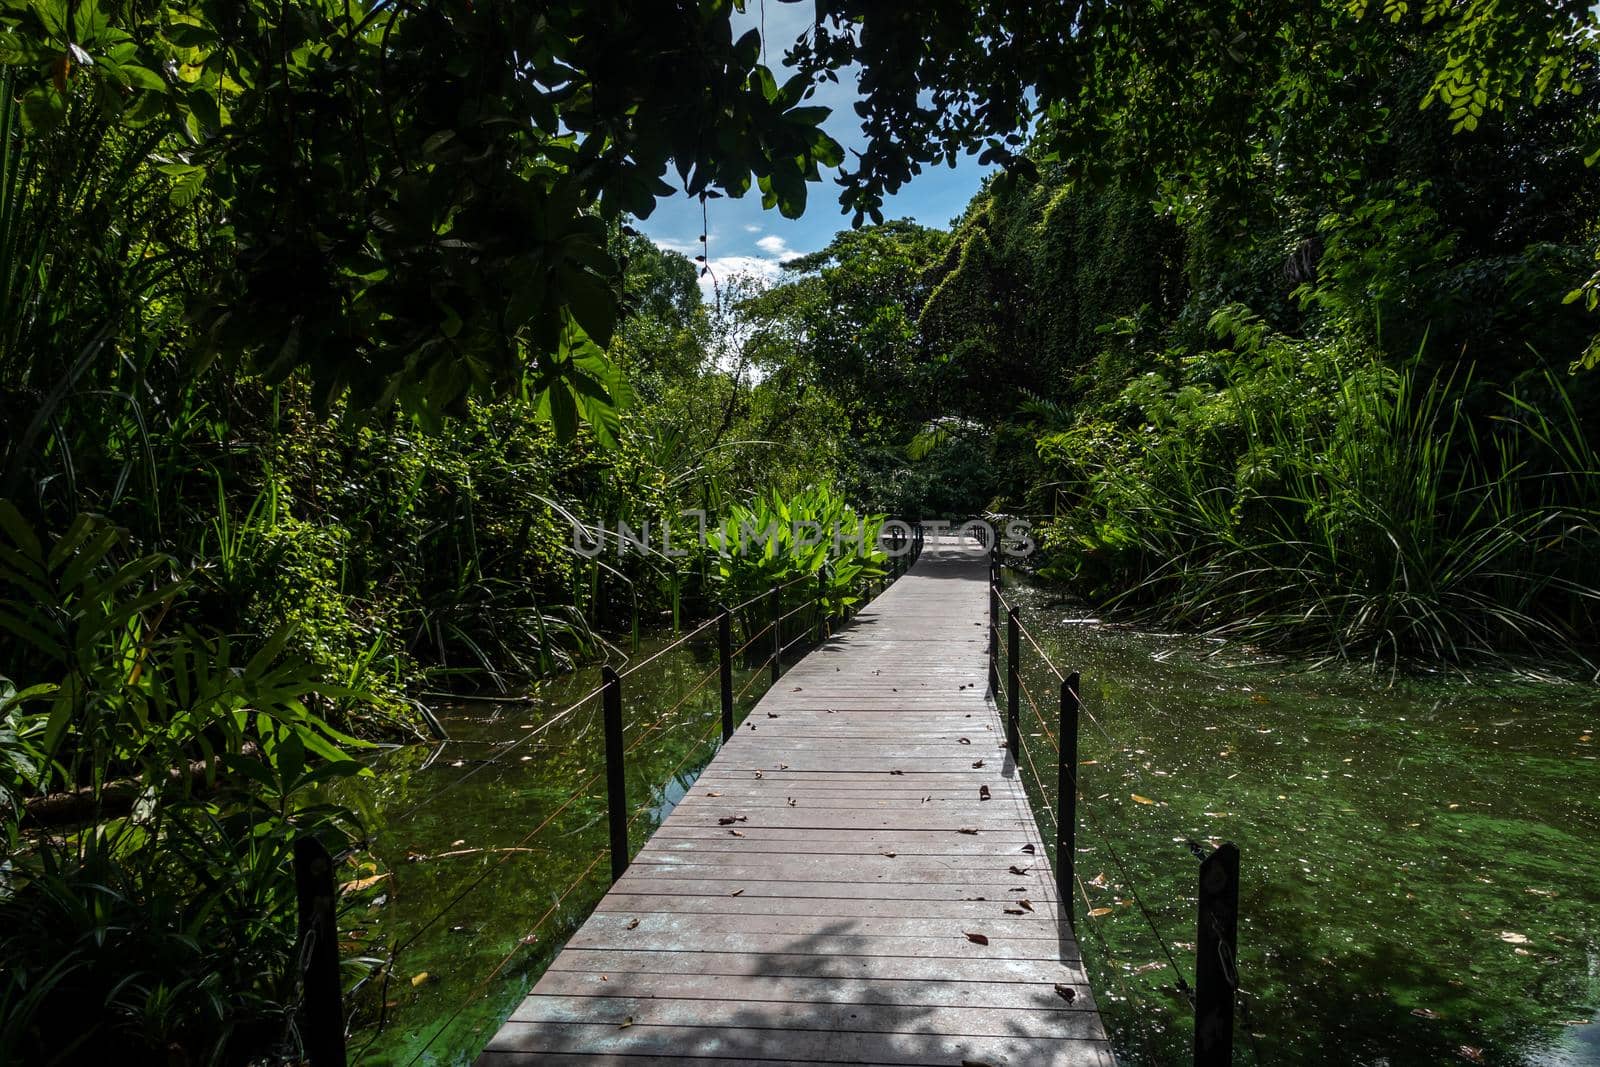 The wooden bridge, pathway into swamps and forests in the water